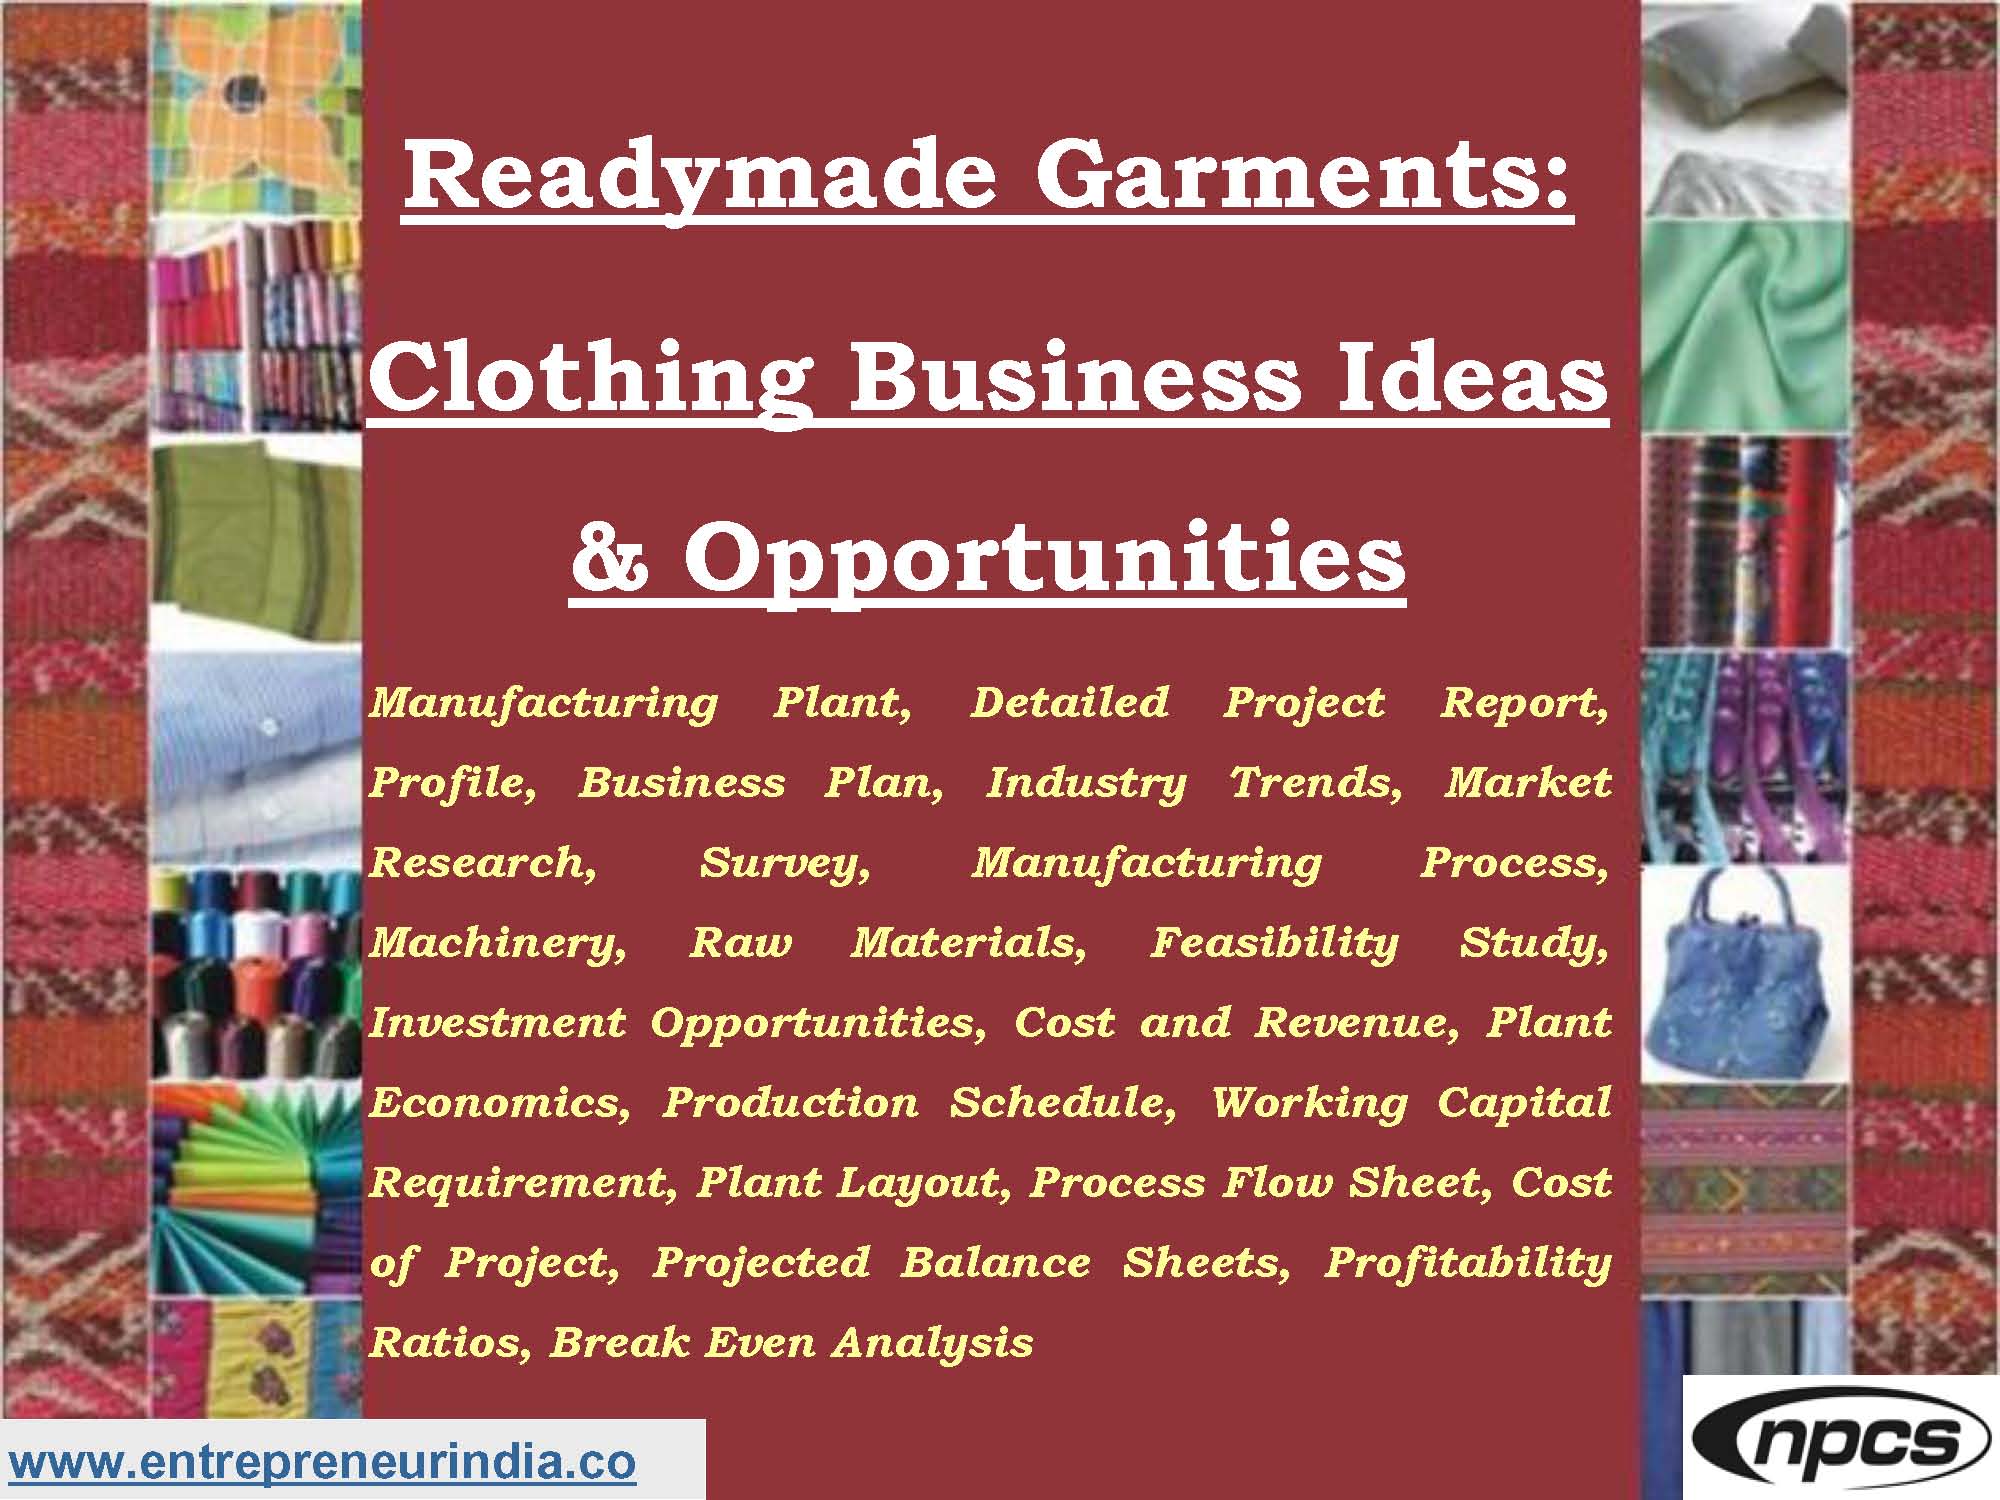 Readymade Garments, Clothing Business Ideas & Opportunities